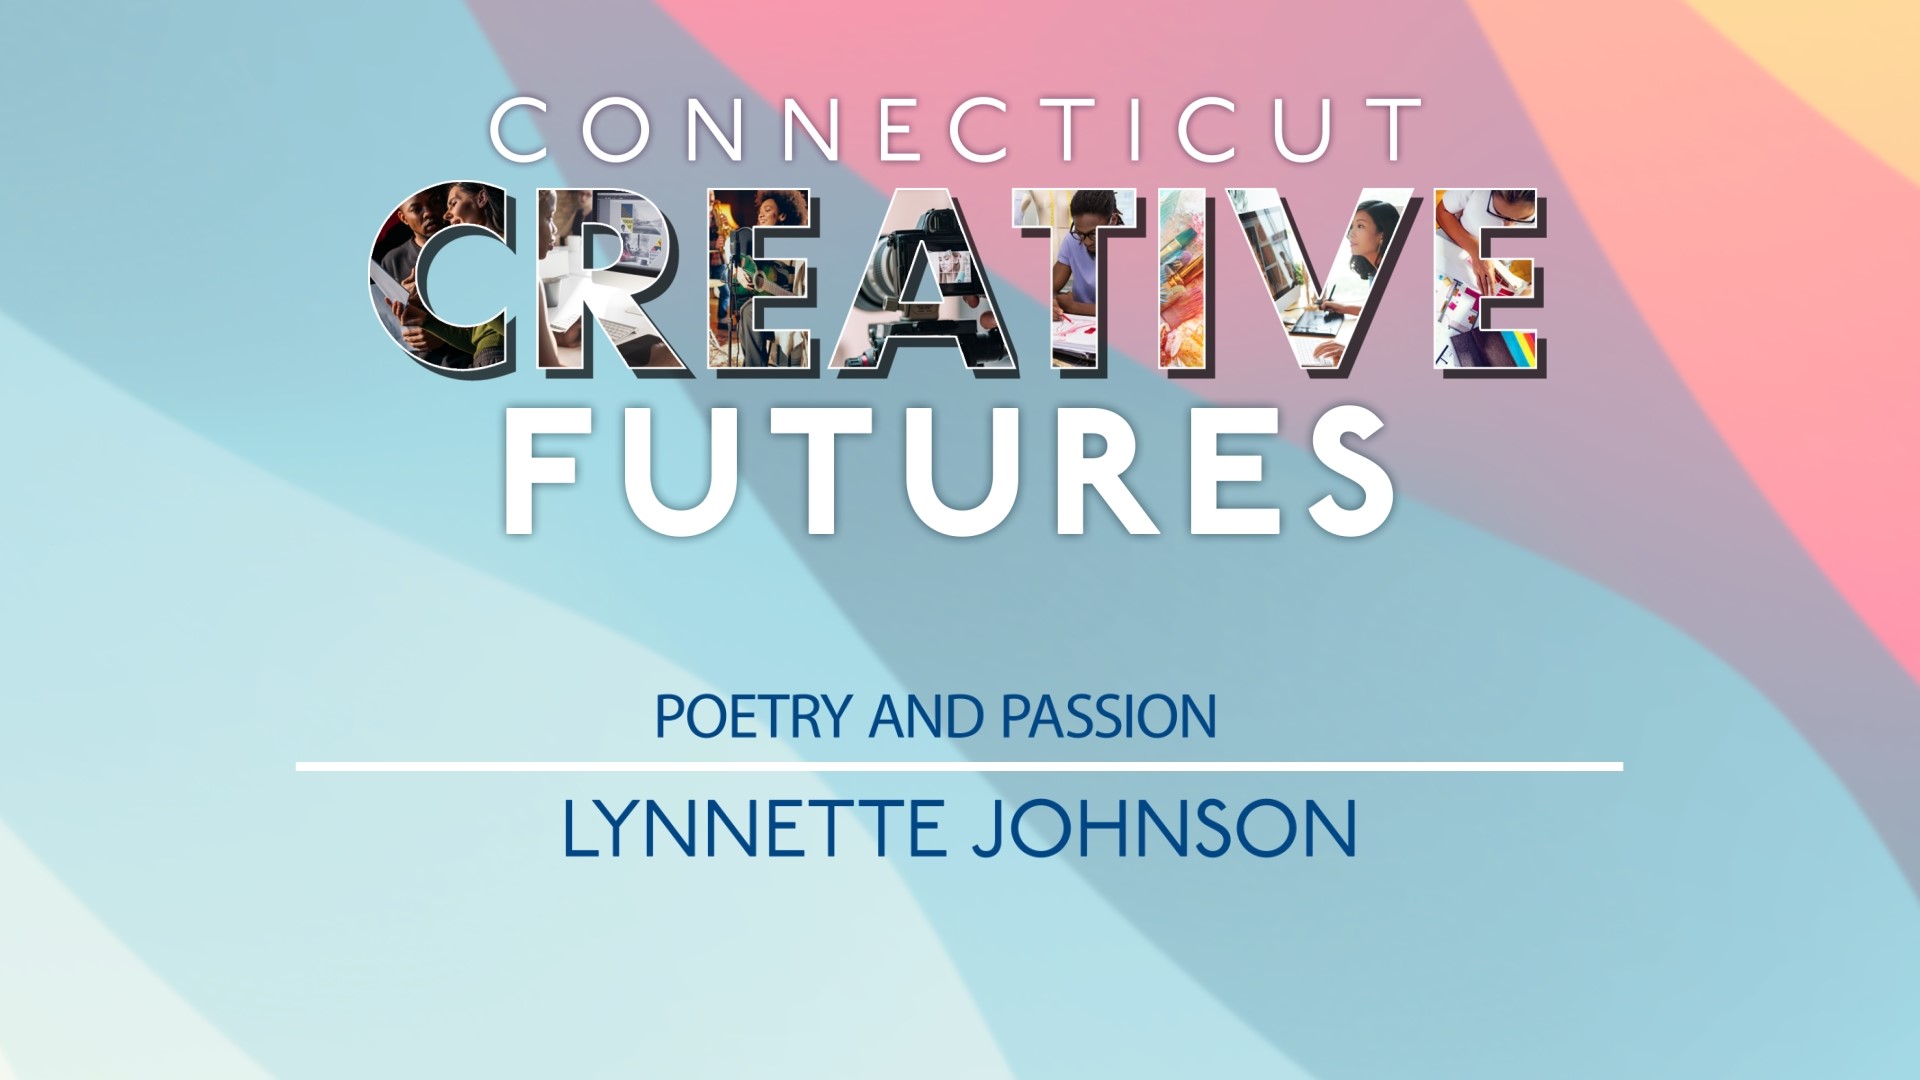 Lynnette Johnson shares how passion fuels her poetry.